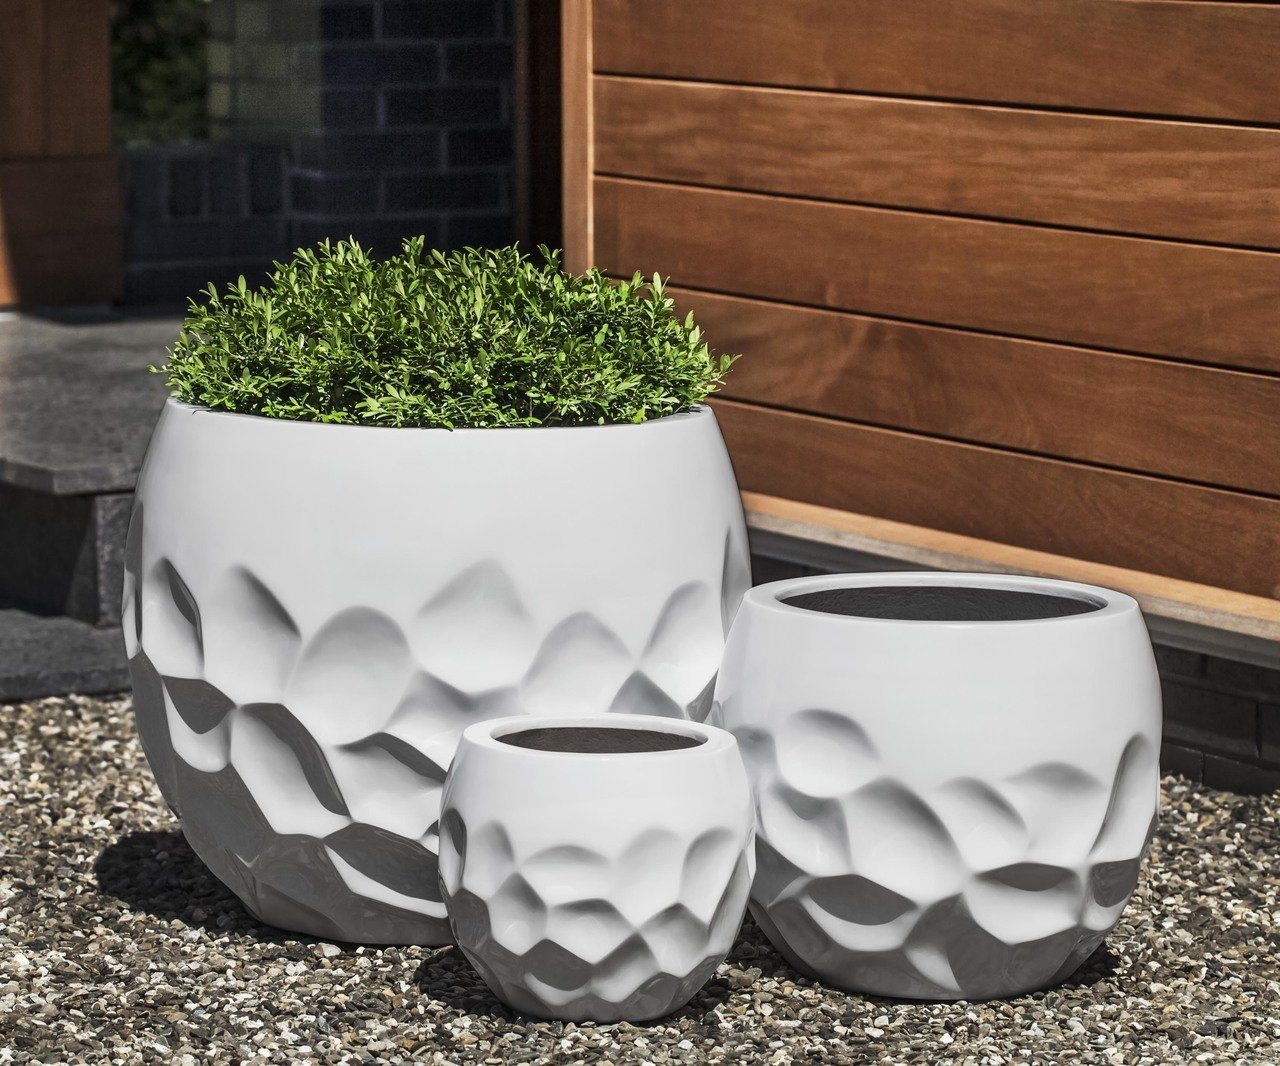 How to make a plastic planter look like stone?